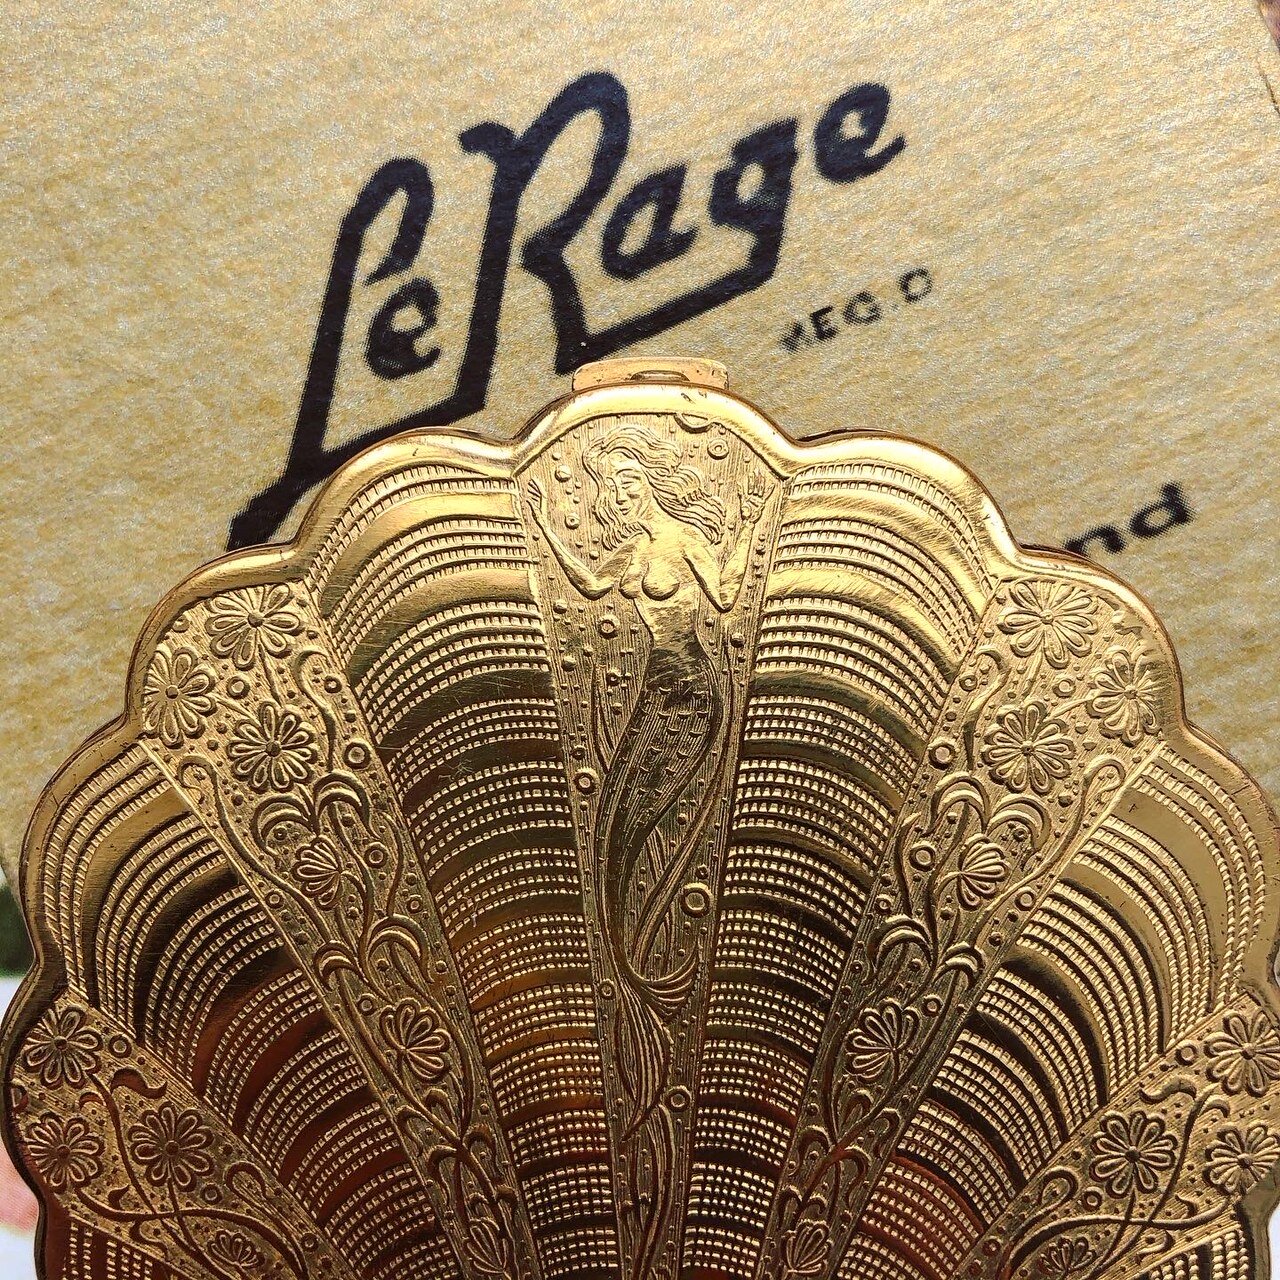   Clamshell Compact Le Rage Ca. 1940s  